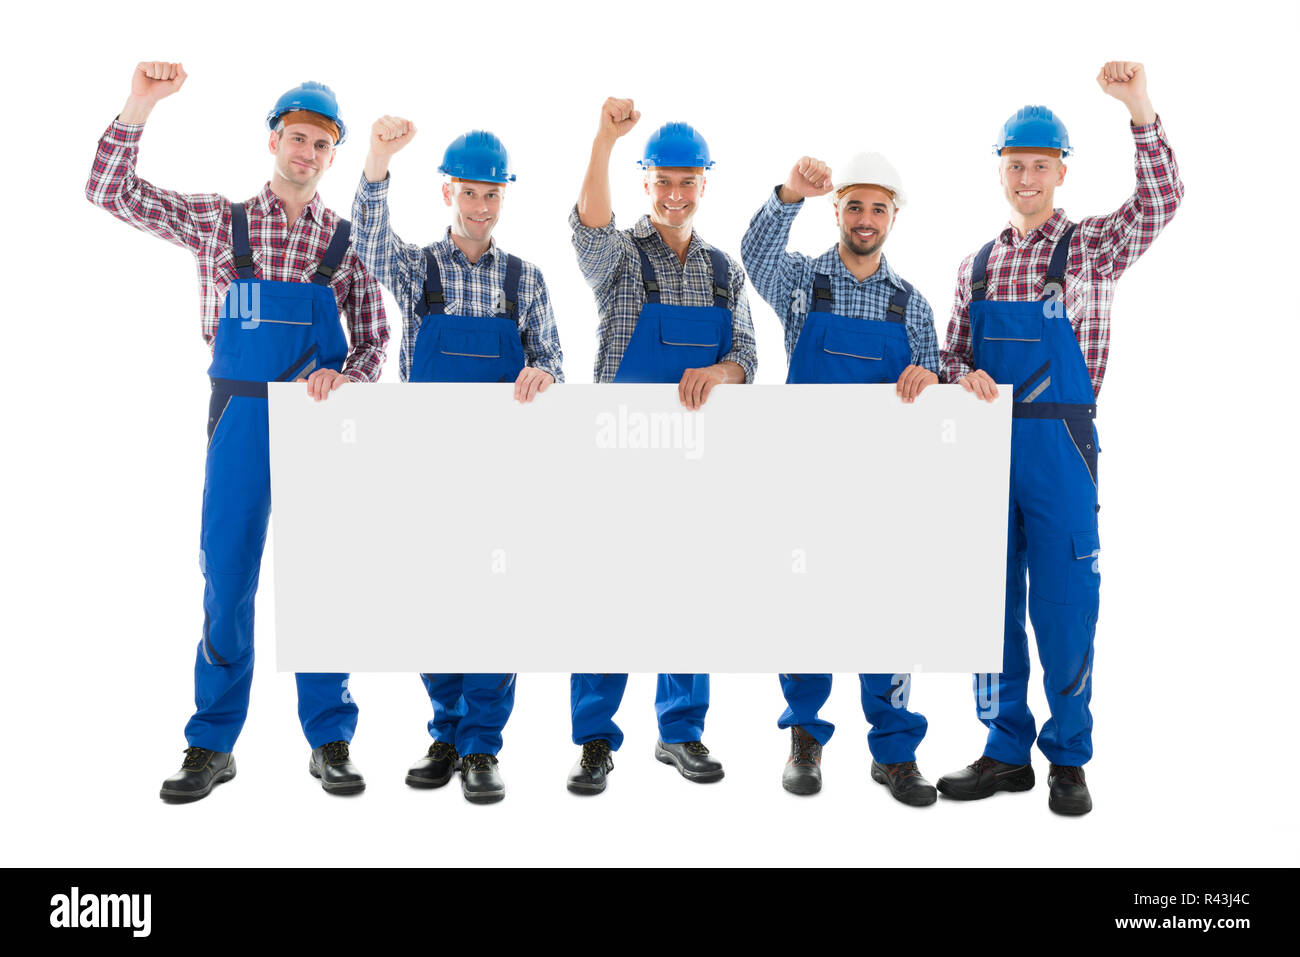 Male Carpenters With Arms Raised Holding Blank Billboard Stock Photo